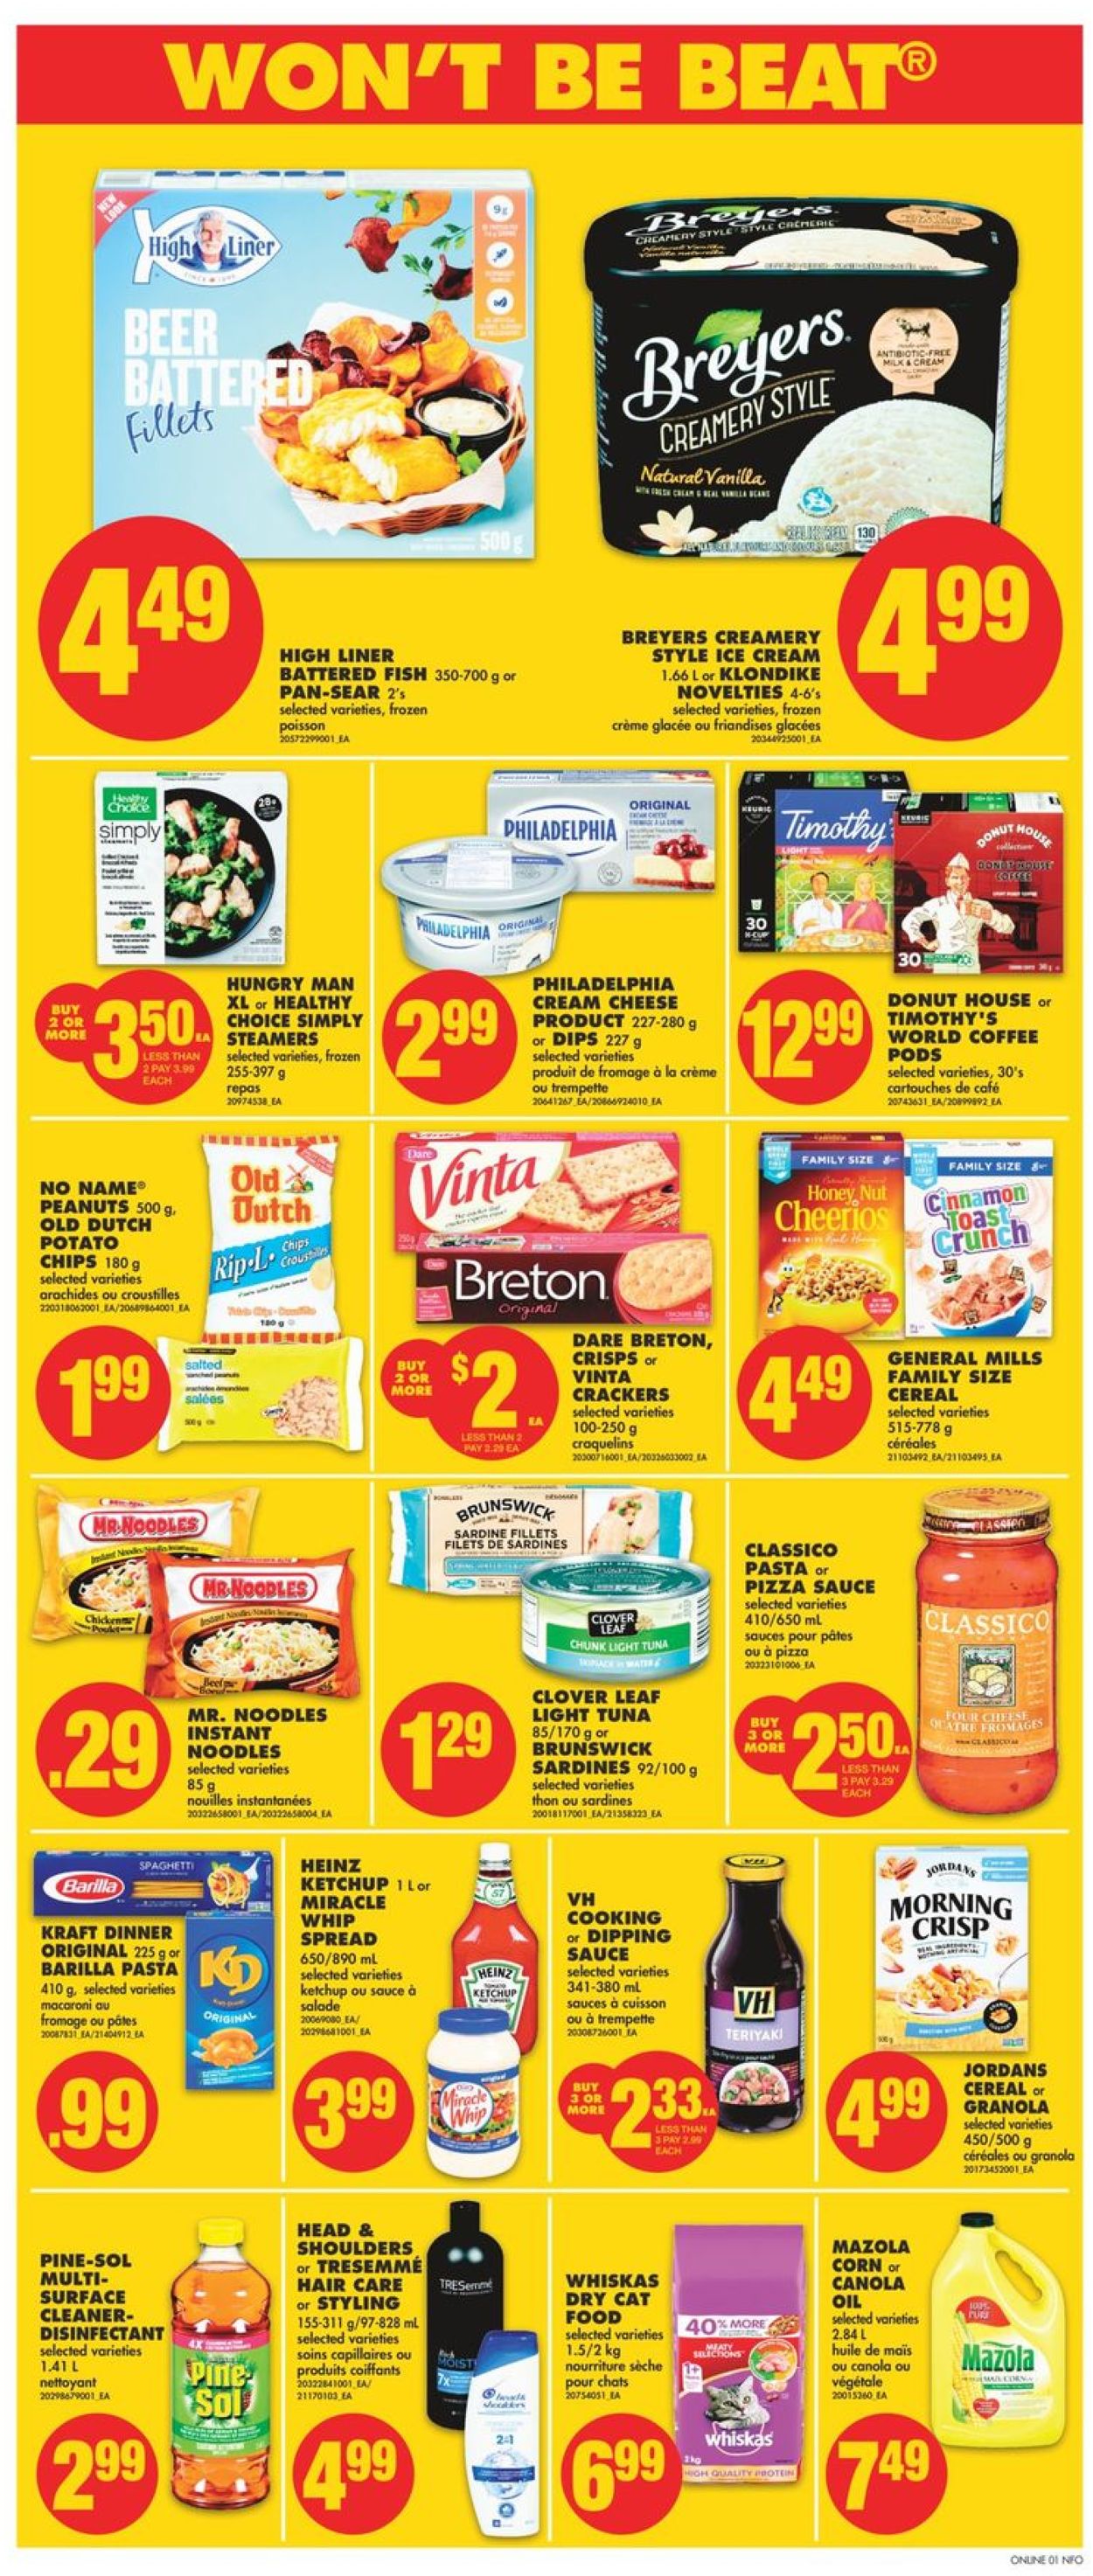 No Frills Flyer from 01/20/2022